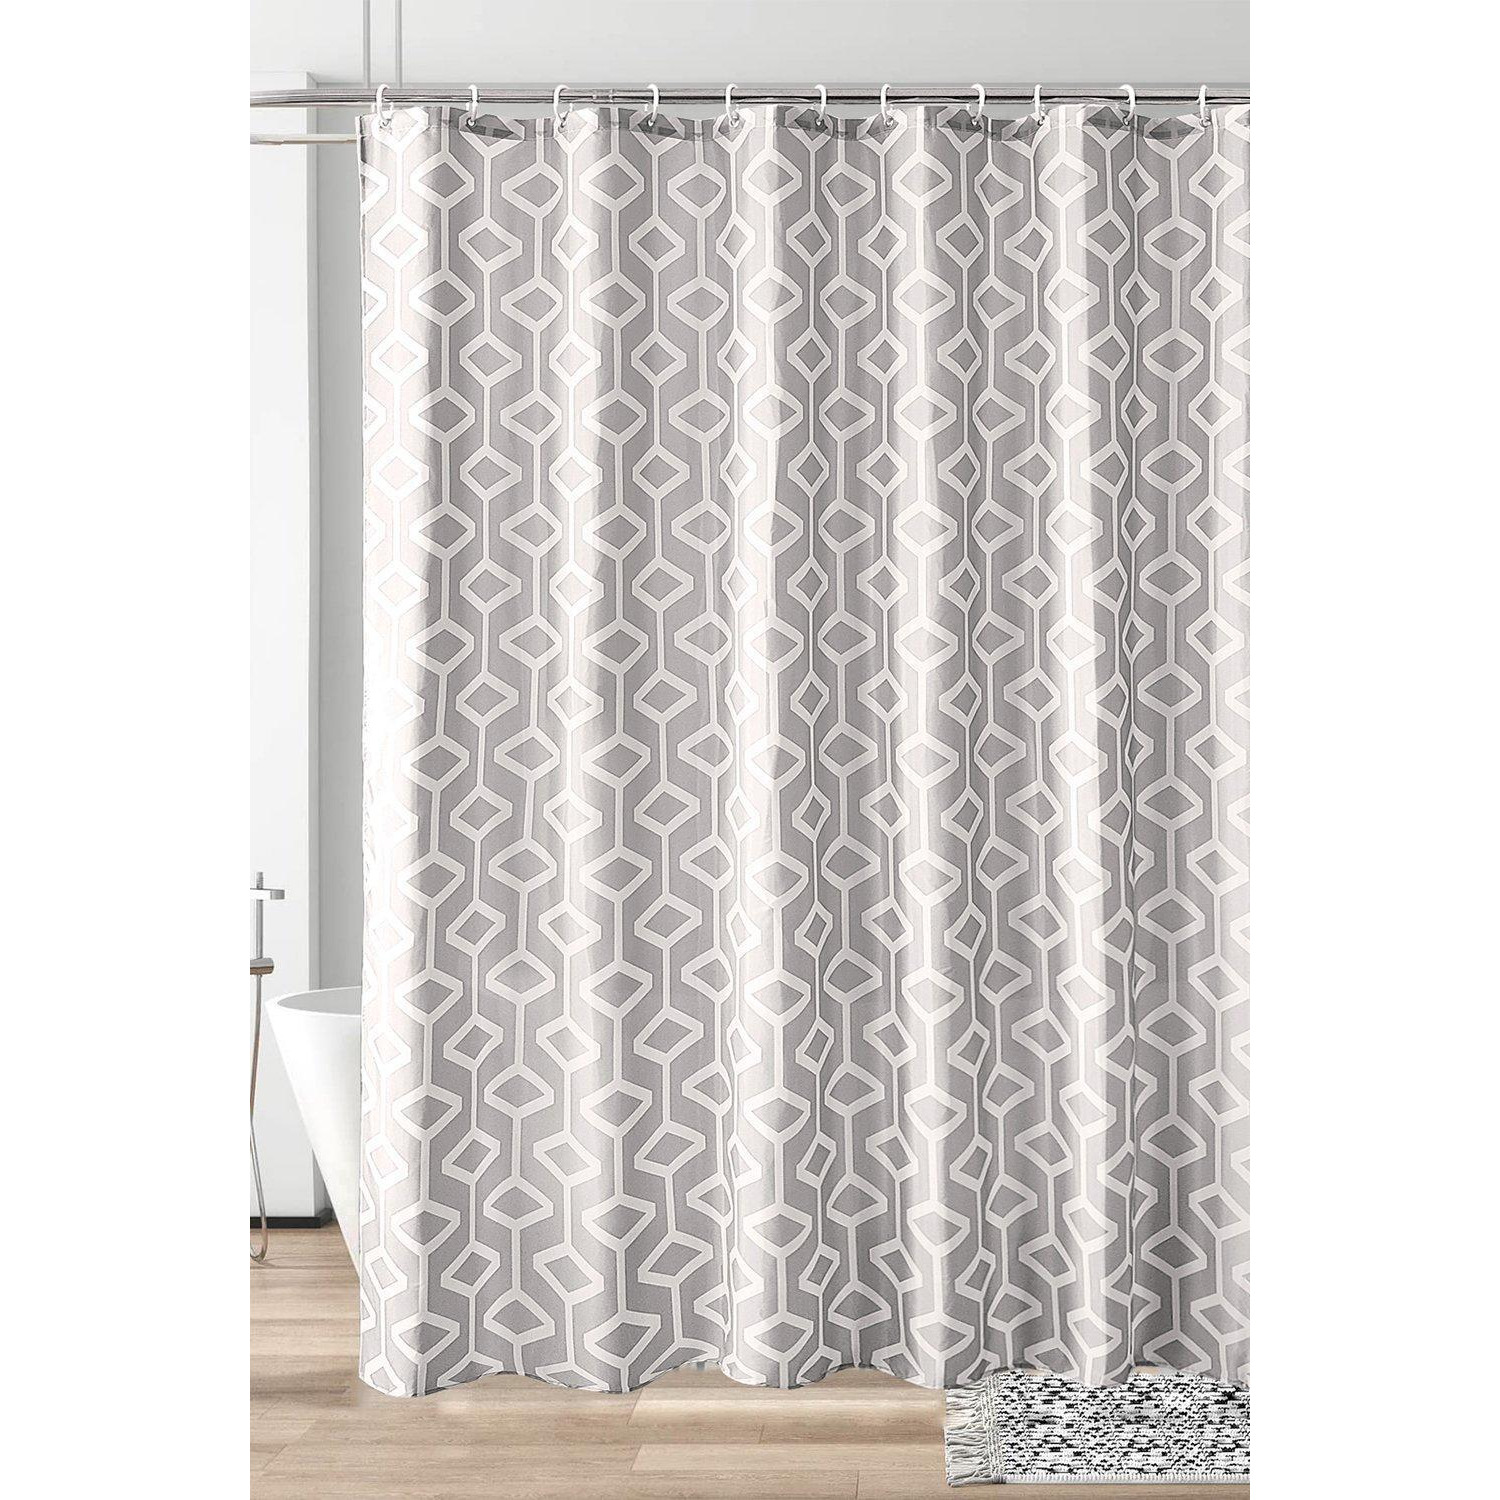 Abstract Geometic Shower Curtain, Grey - 180cm x 180cm - image 1